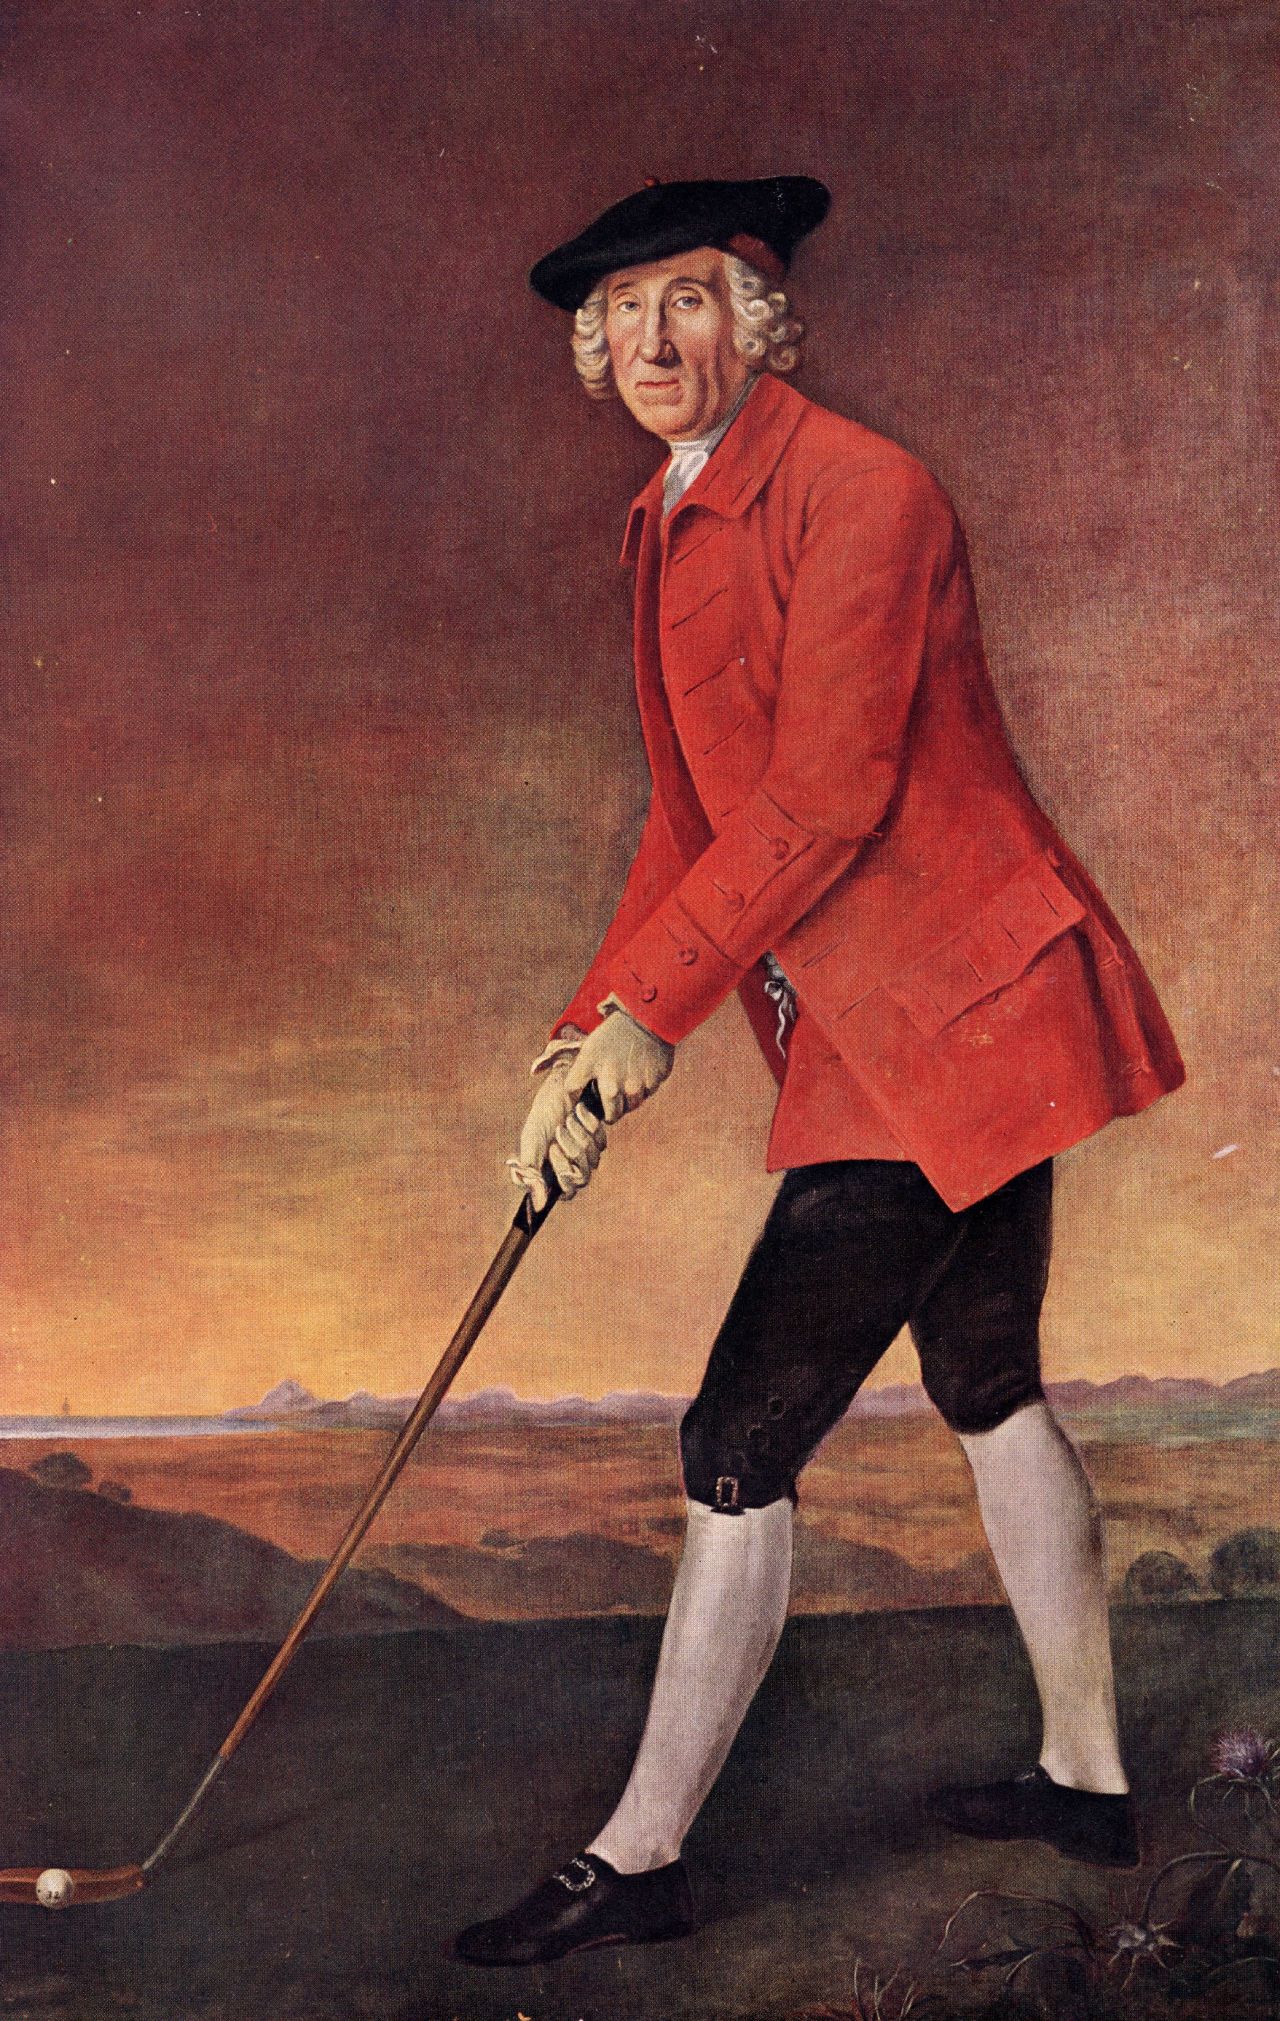 A portrait of William St. Clair of Rosslyn dating from around 1780. He was a member of the Honorable Company of Edinburgh Golfers (formerly known as the Gentleman Golfers of Edinburgh) who <a href="http://www.scottishgolfhistory.org/origin-of-golf-terms/rules-of-golf/" target="_blank" target="_blank">drew up the first known Rules of Golf</a>. The military style coat was a familiar sight on the links in that era, Fleming says.  <br /><br />"Members of early golf societies in Scotland and England from the early 1700s onwards were quite frequently military men who would often have military style coats -- it was the fashion of the day to wear a button coat," Fleming told CNN. <br /><br />"Different societies had different colors -- red is an R&A color and other societies also wore red, but others wore blue, green, there are instances of yellow (coats). It was symbol of membership. They would have special buttons for different societies, in the same way today that clubs have their own crest on jumpers and jackets, blazers, club ties. They also served a practical purpose -- they were warm and highly visible."